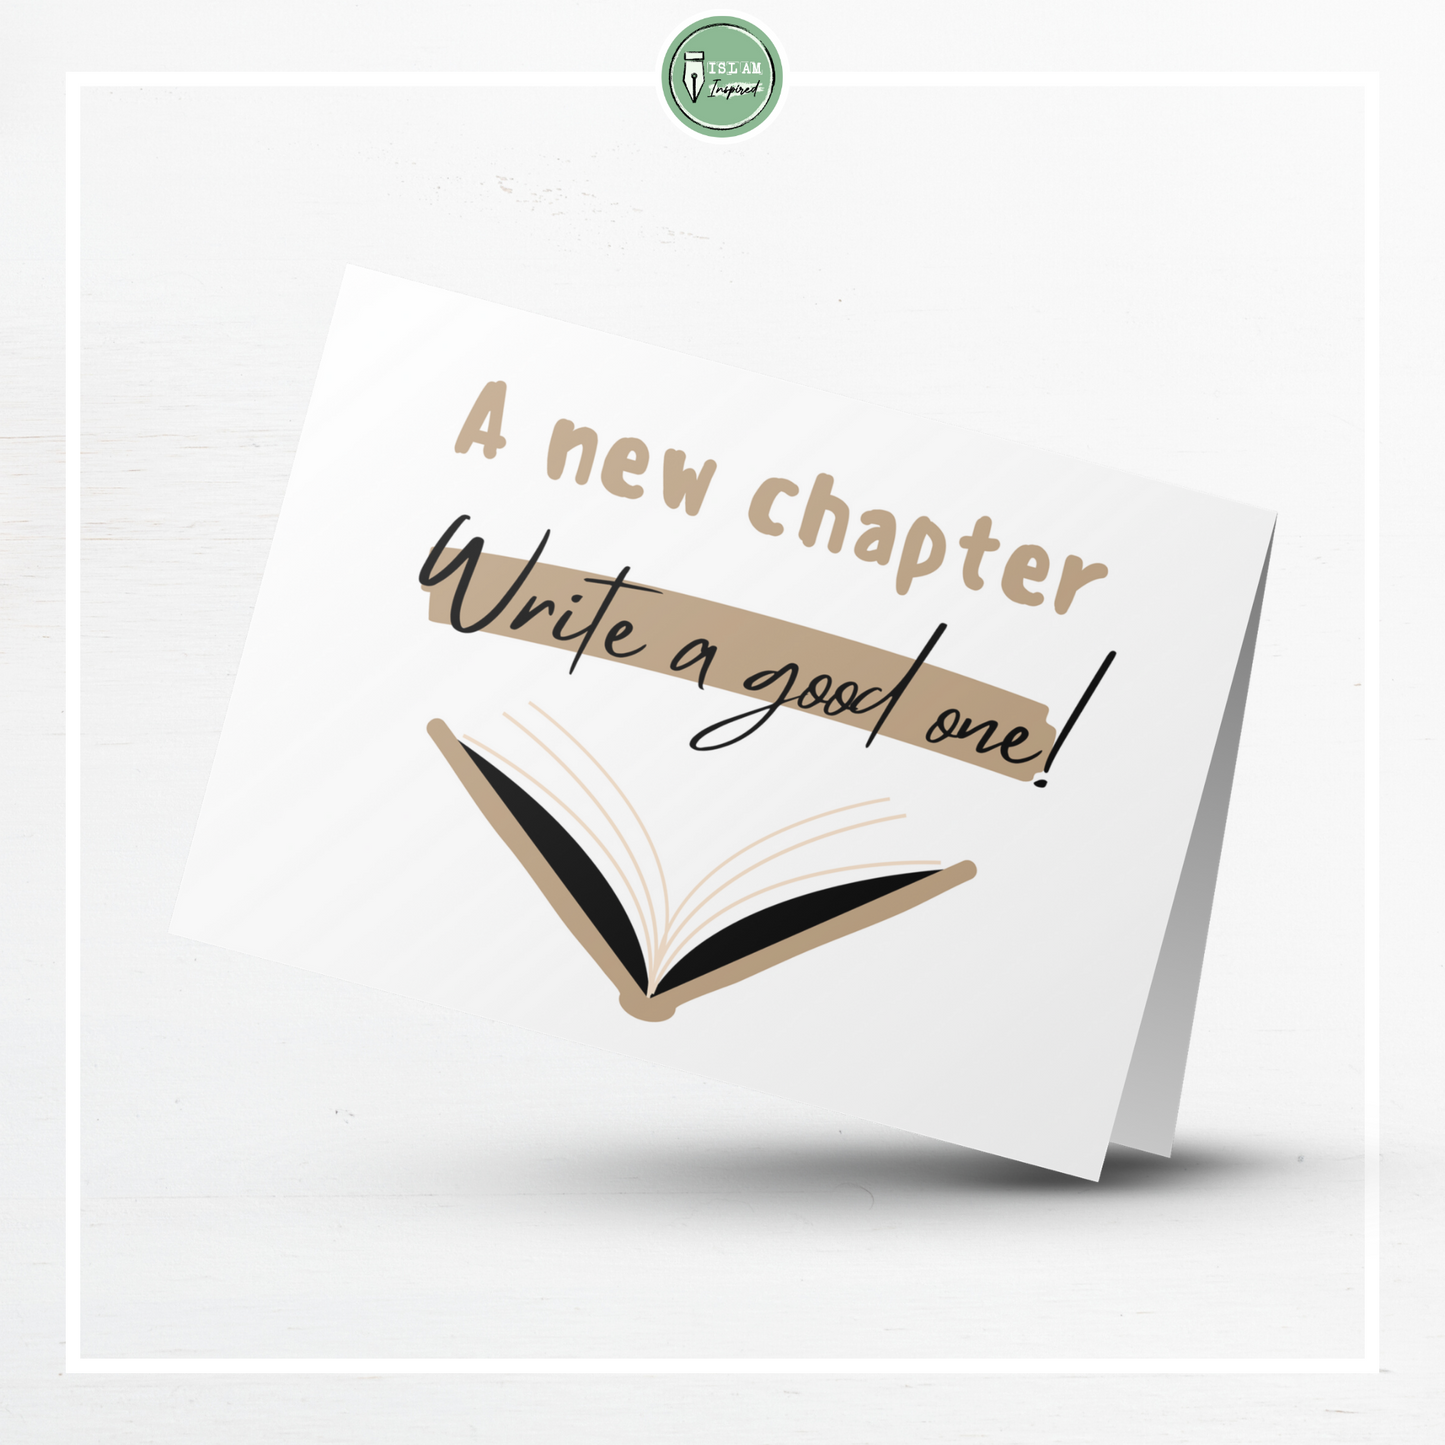 A new chapter, write a good one!